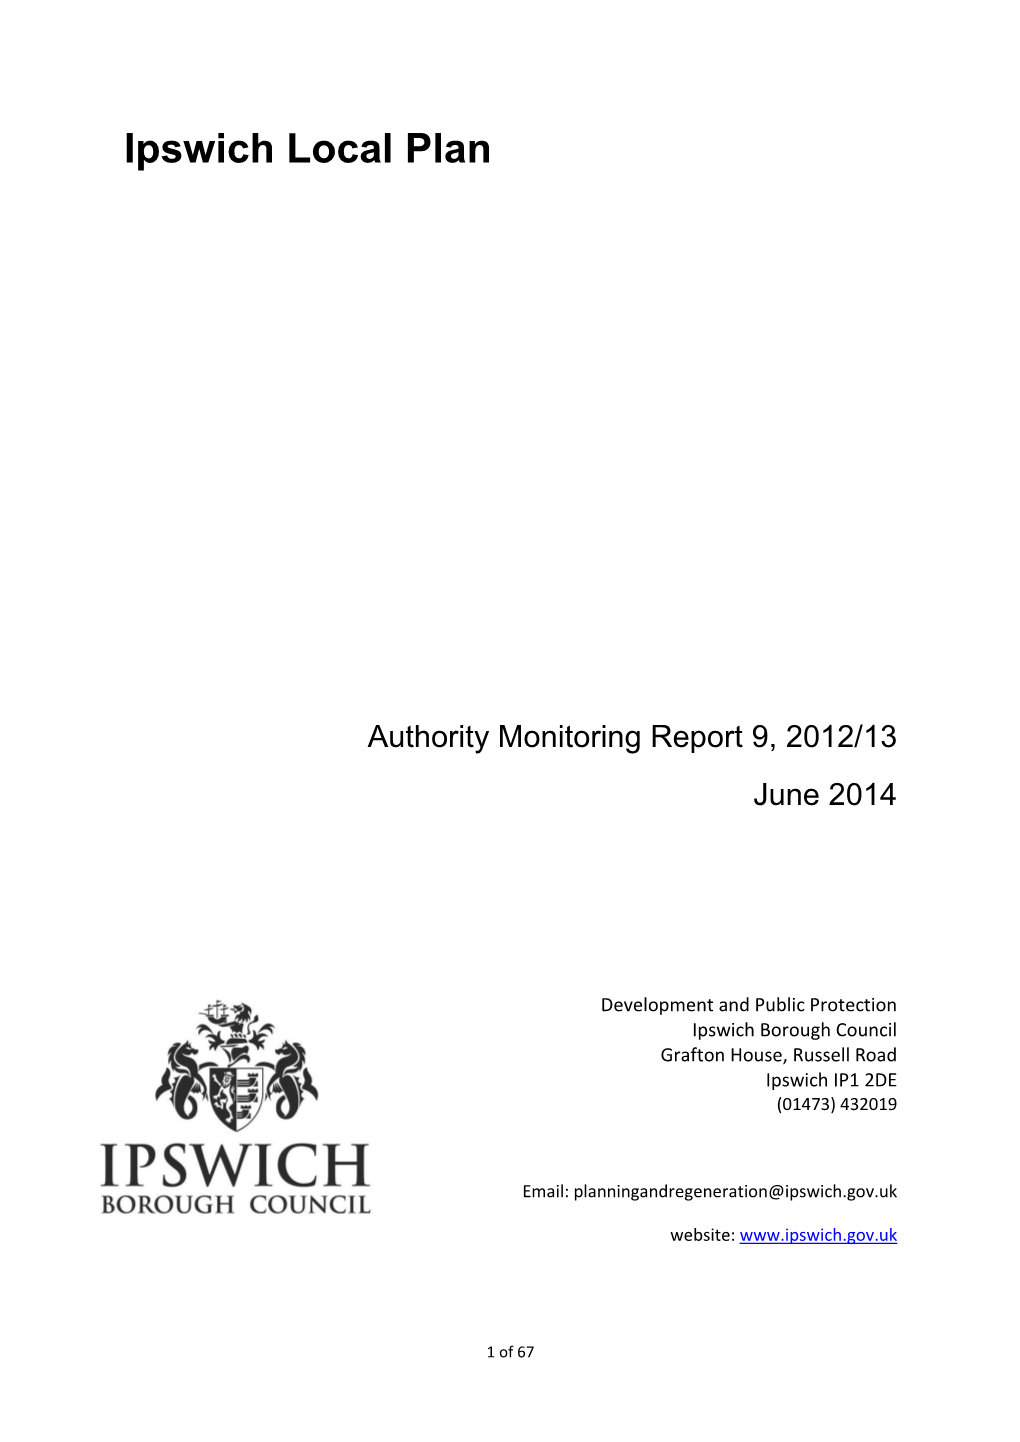 Authority Monitoring Report 2012/13